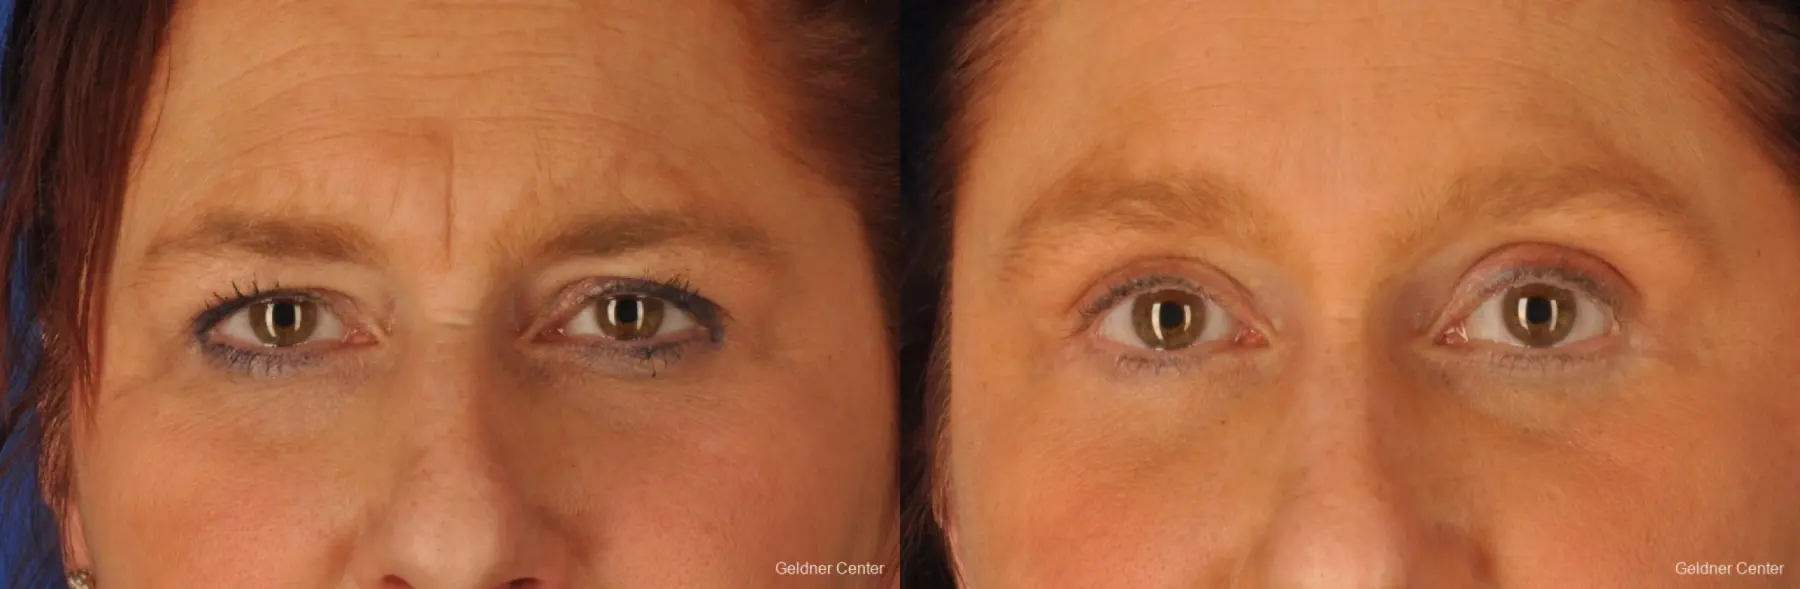 upper and lower blepharoplasty, over 45 - Before and After